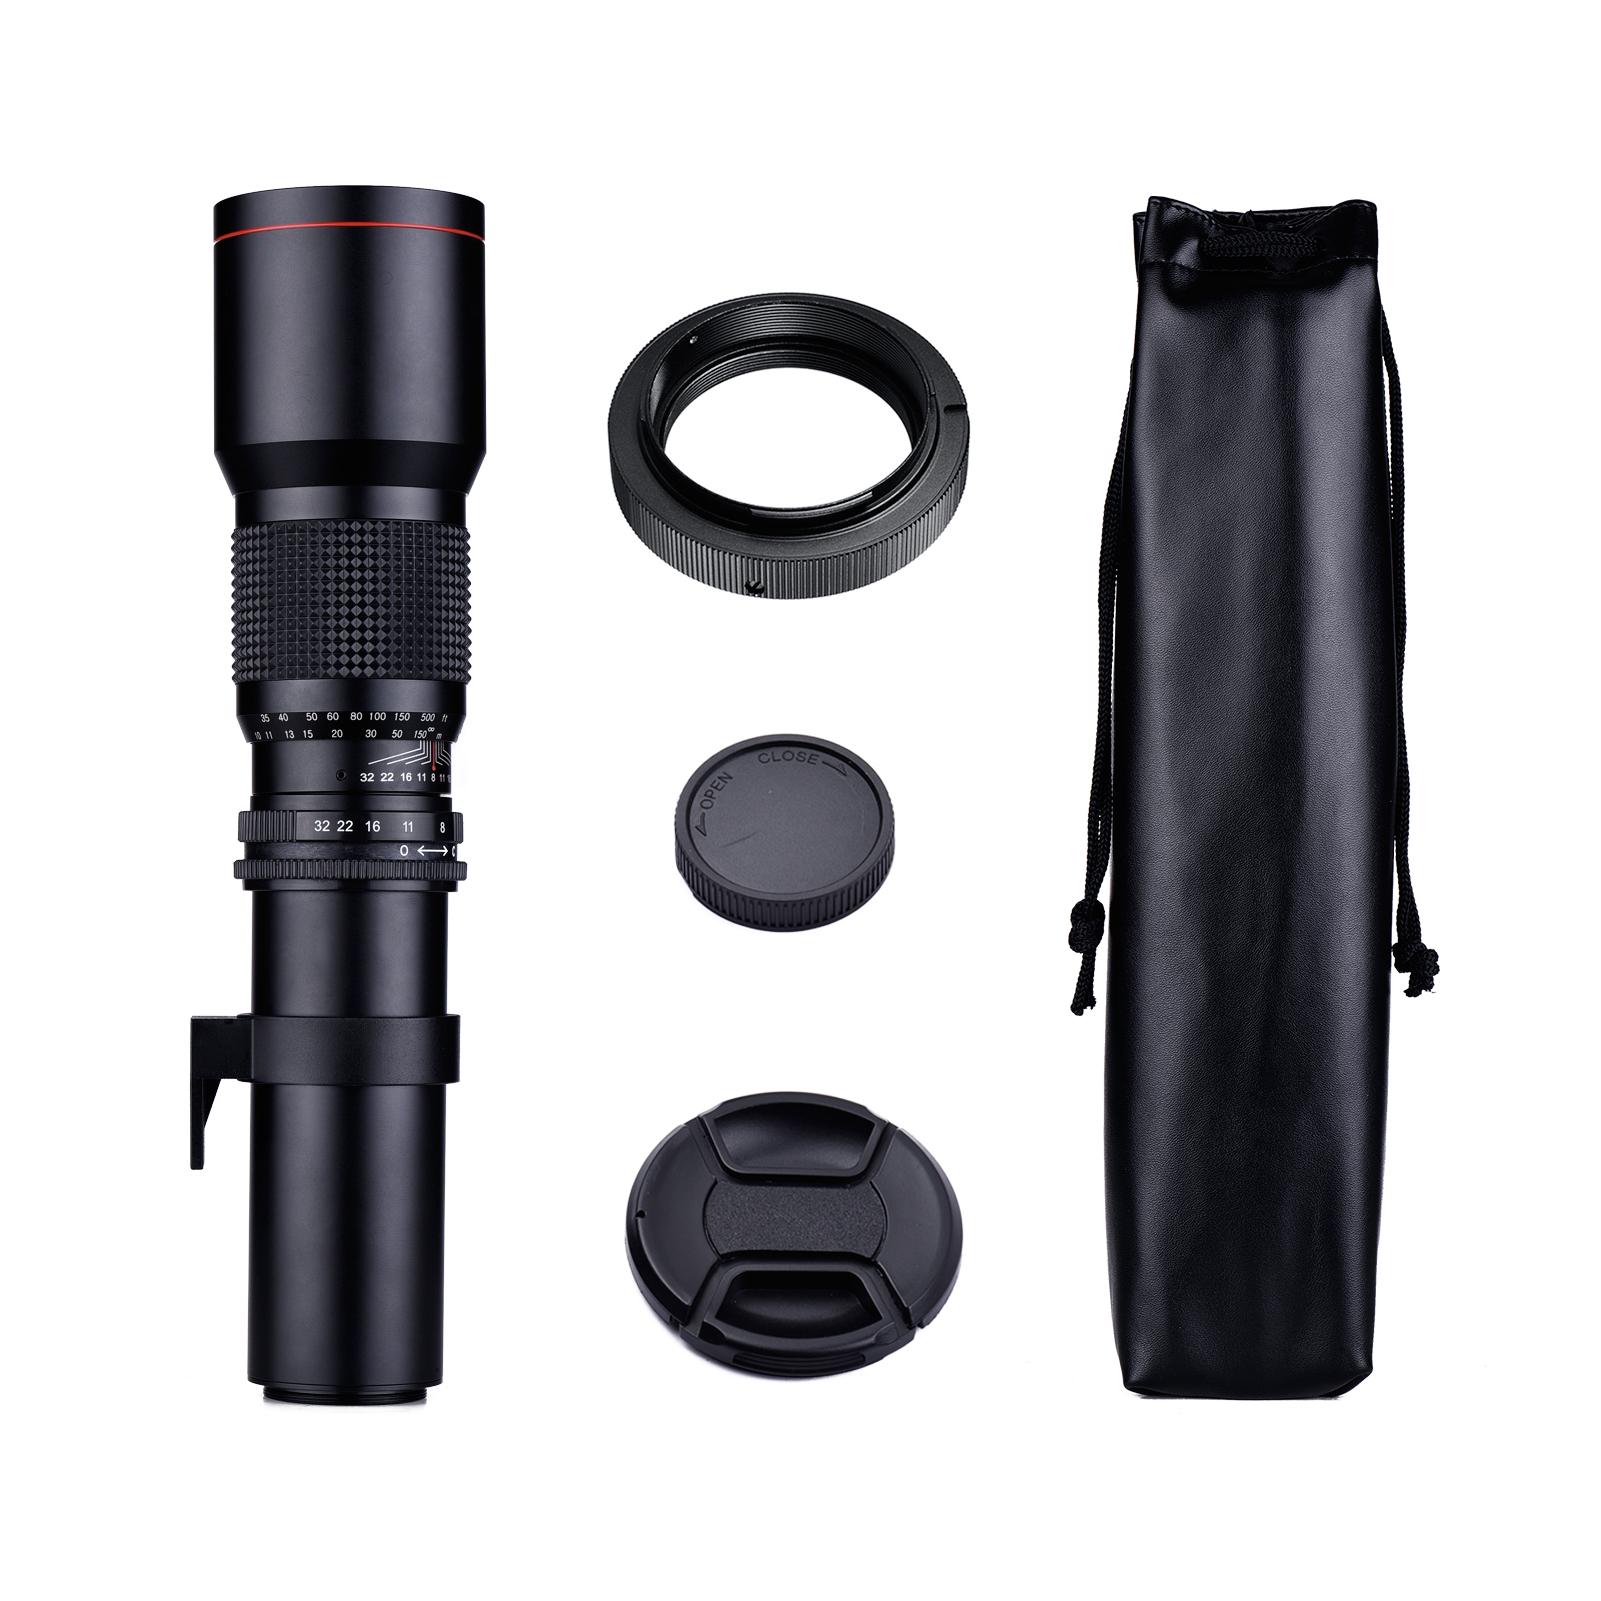 500mm F/8.0-32 Multi Coated Super Telephoto Lens Manual Zoom + T-Mount to A-Mount Adapter Ring Kit Replacement for Sony